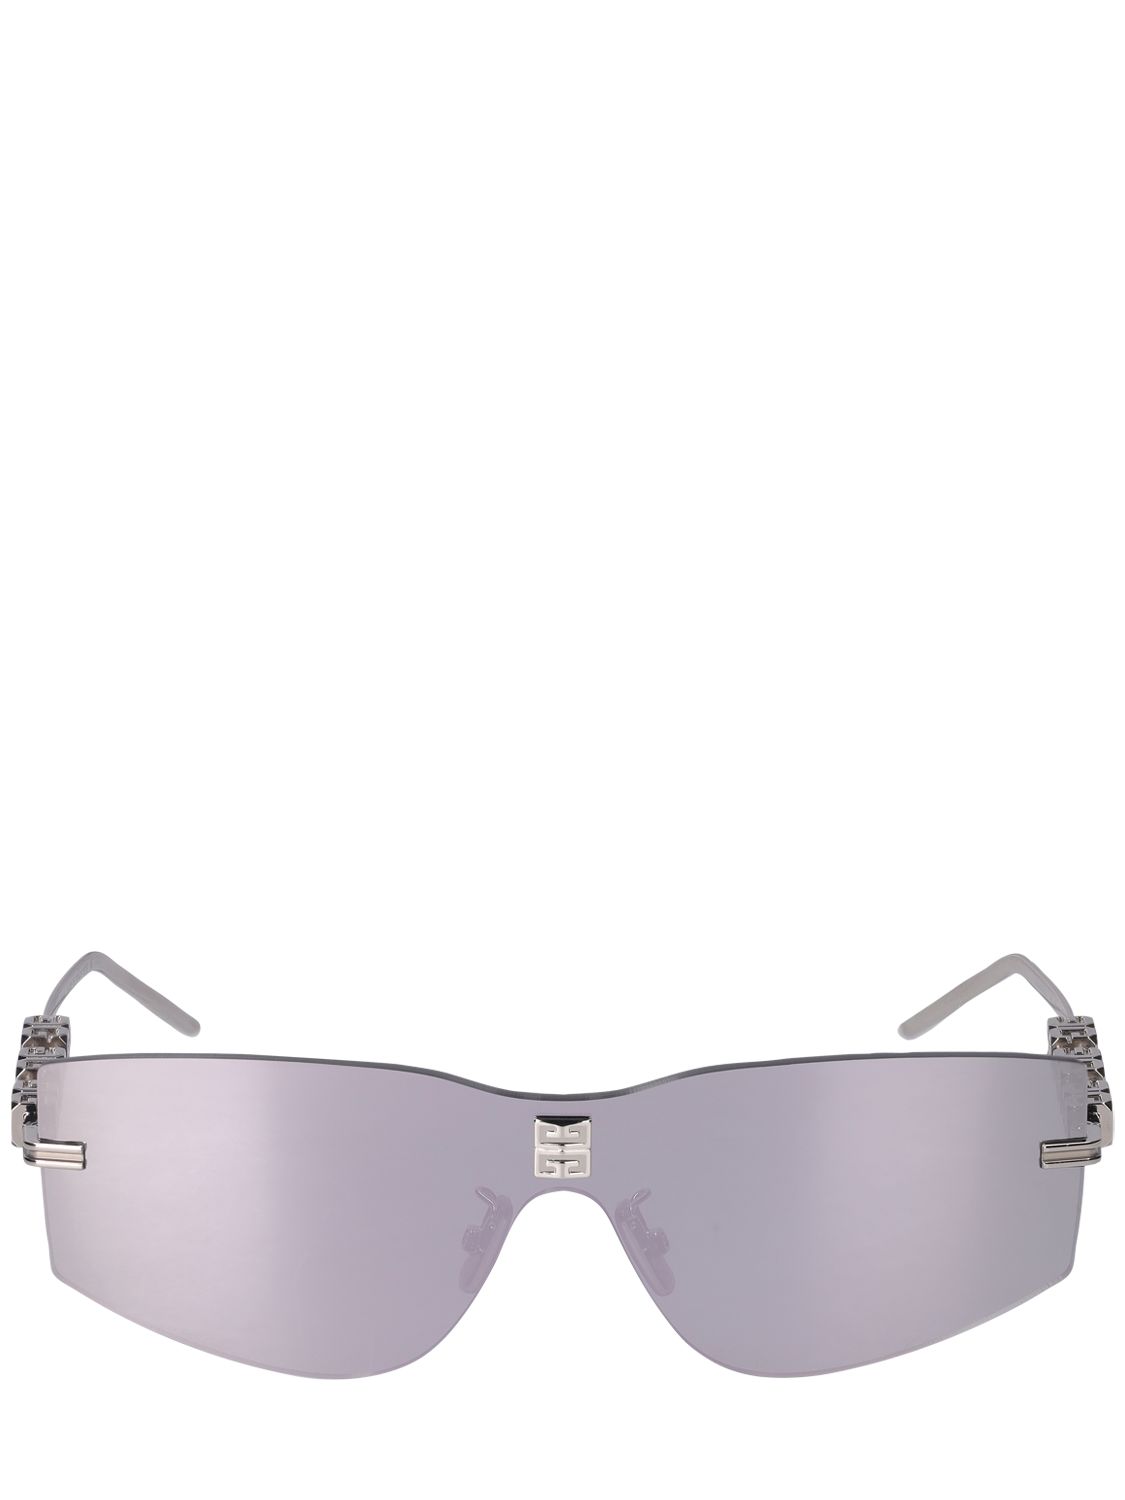 Givenchy 4gem Mask Metal Sunglasses In Gray